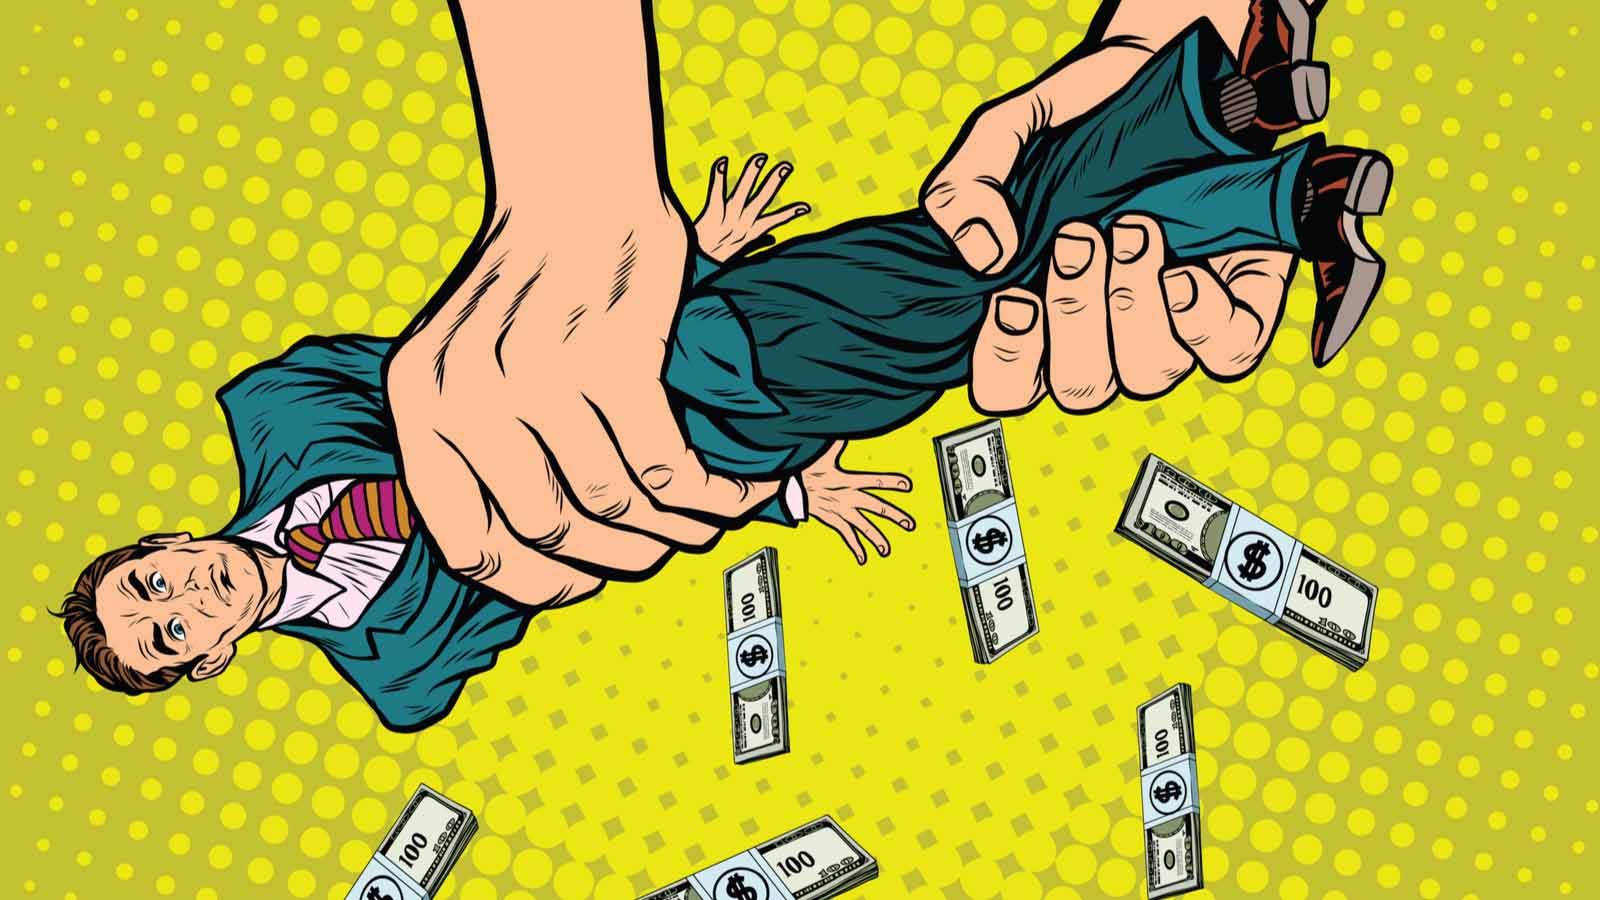 short-squeeze stocks illustration of a person wringing out a business man on a yellow cartoon backdrop with dollar bills falling, ATER is facing Short Squeeze Stocks